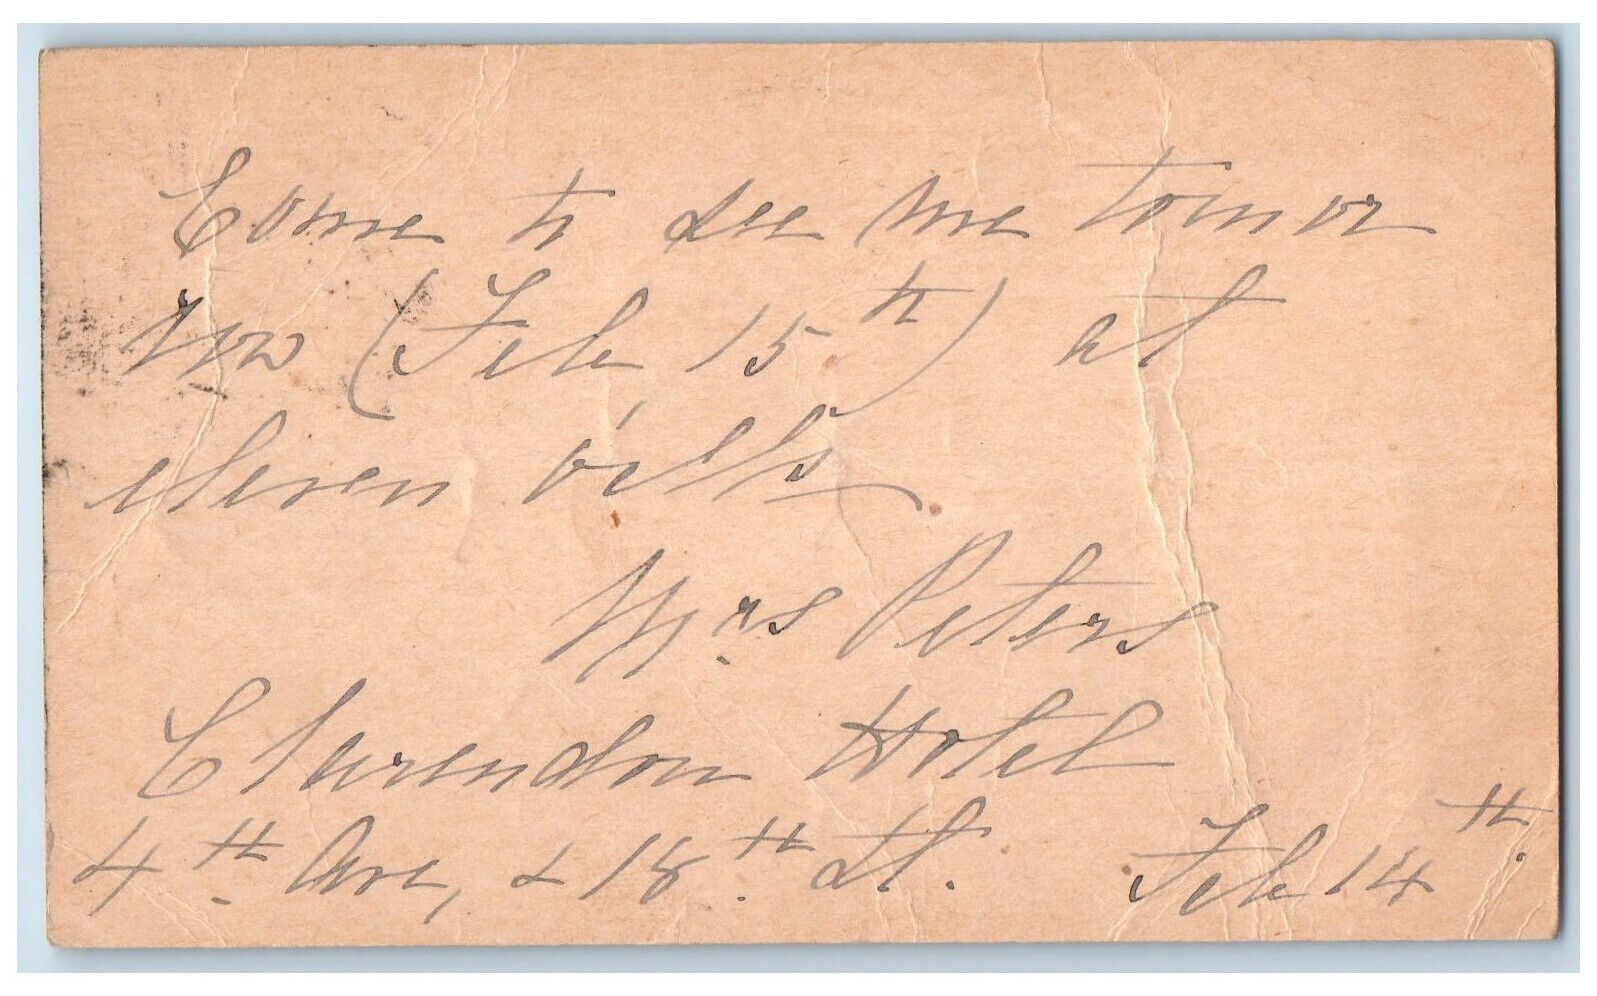 1884 Clarendon Hotel Mrs. Peters Letter New York City NY Postal Card